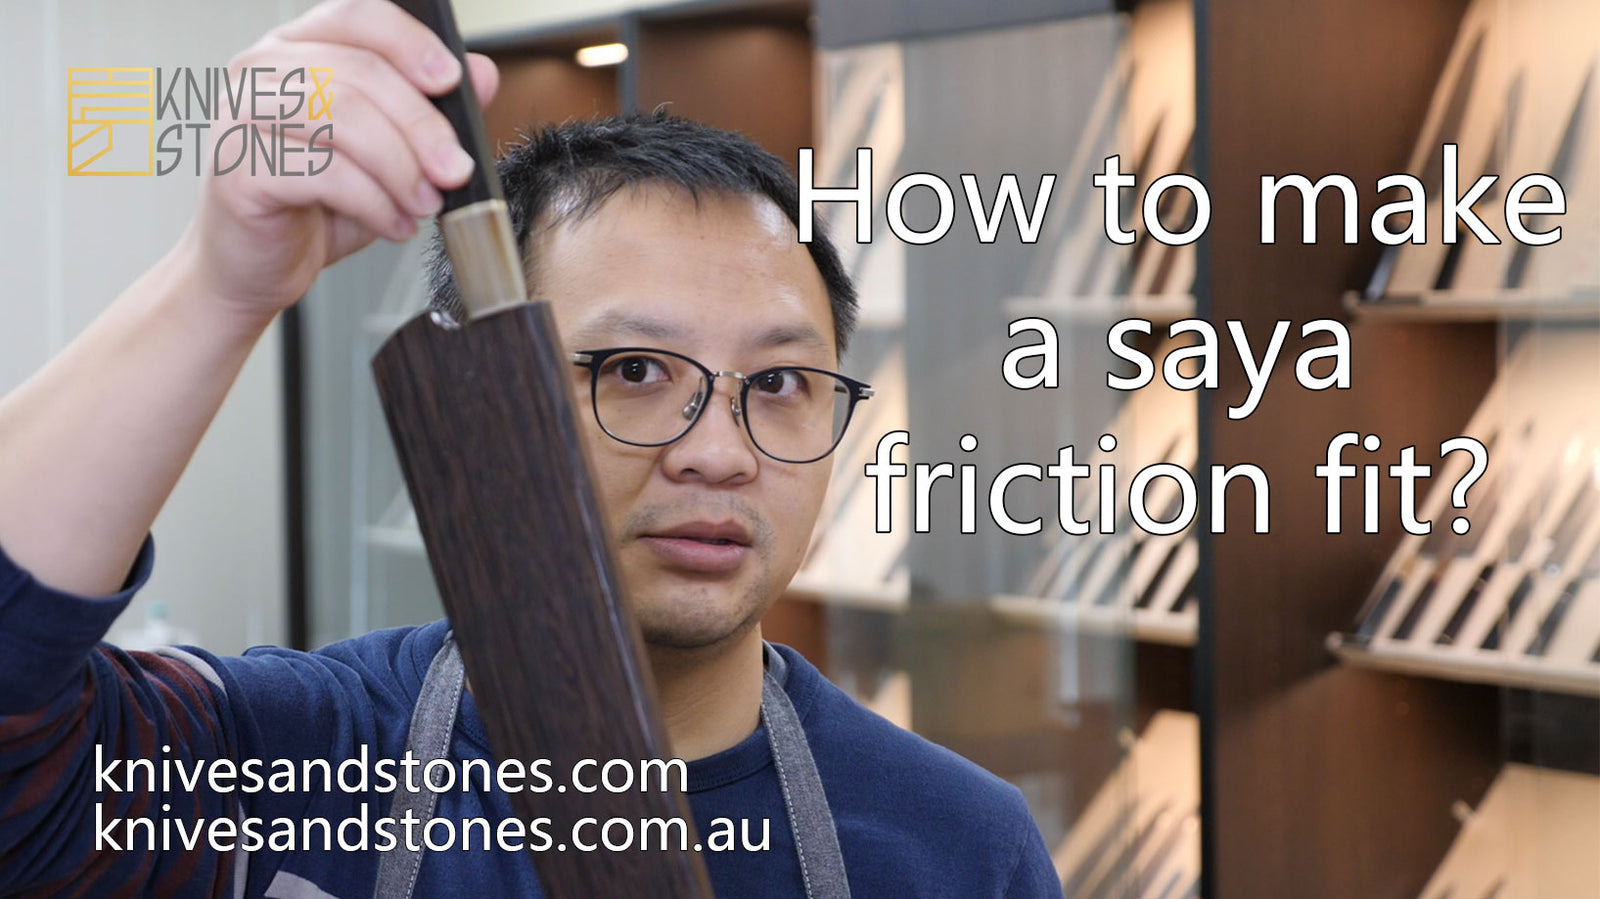 How to friction fit a saya